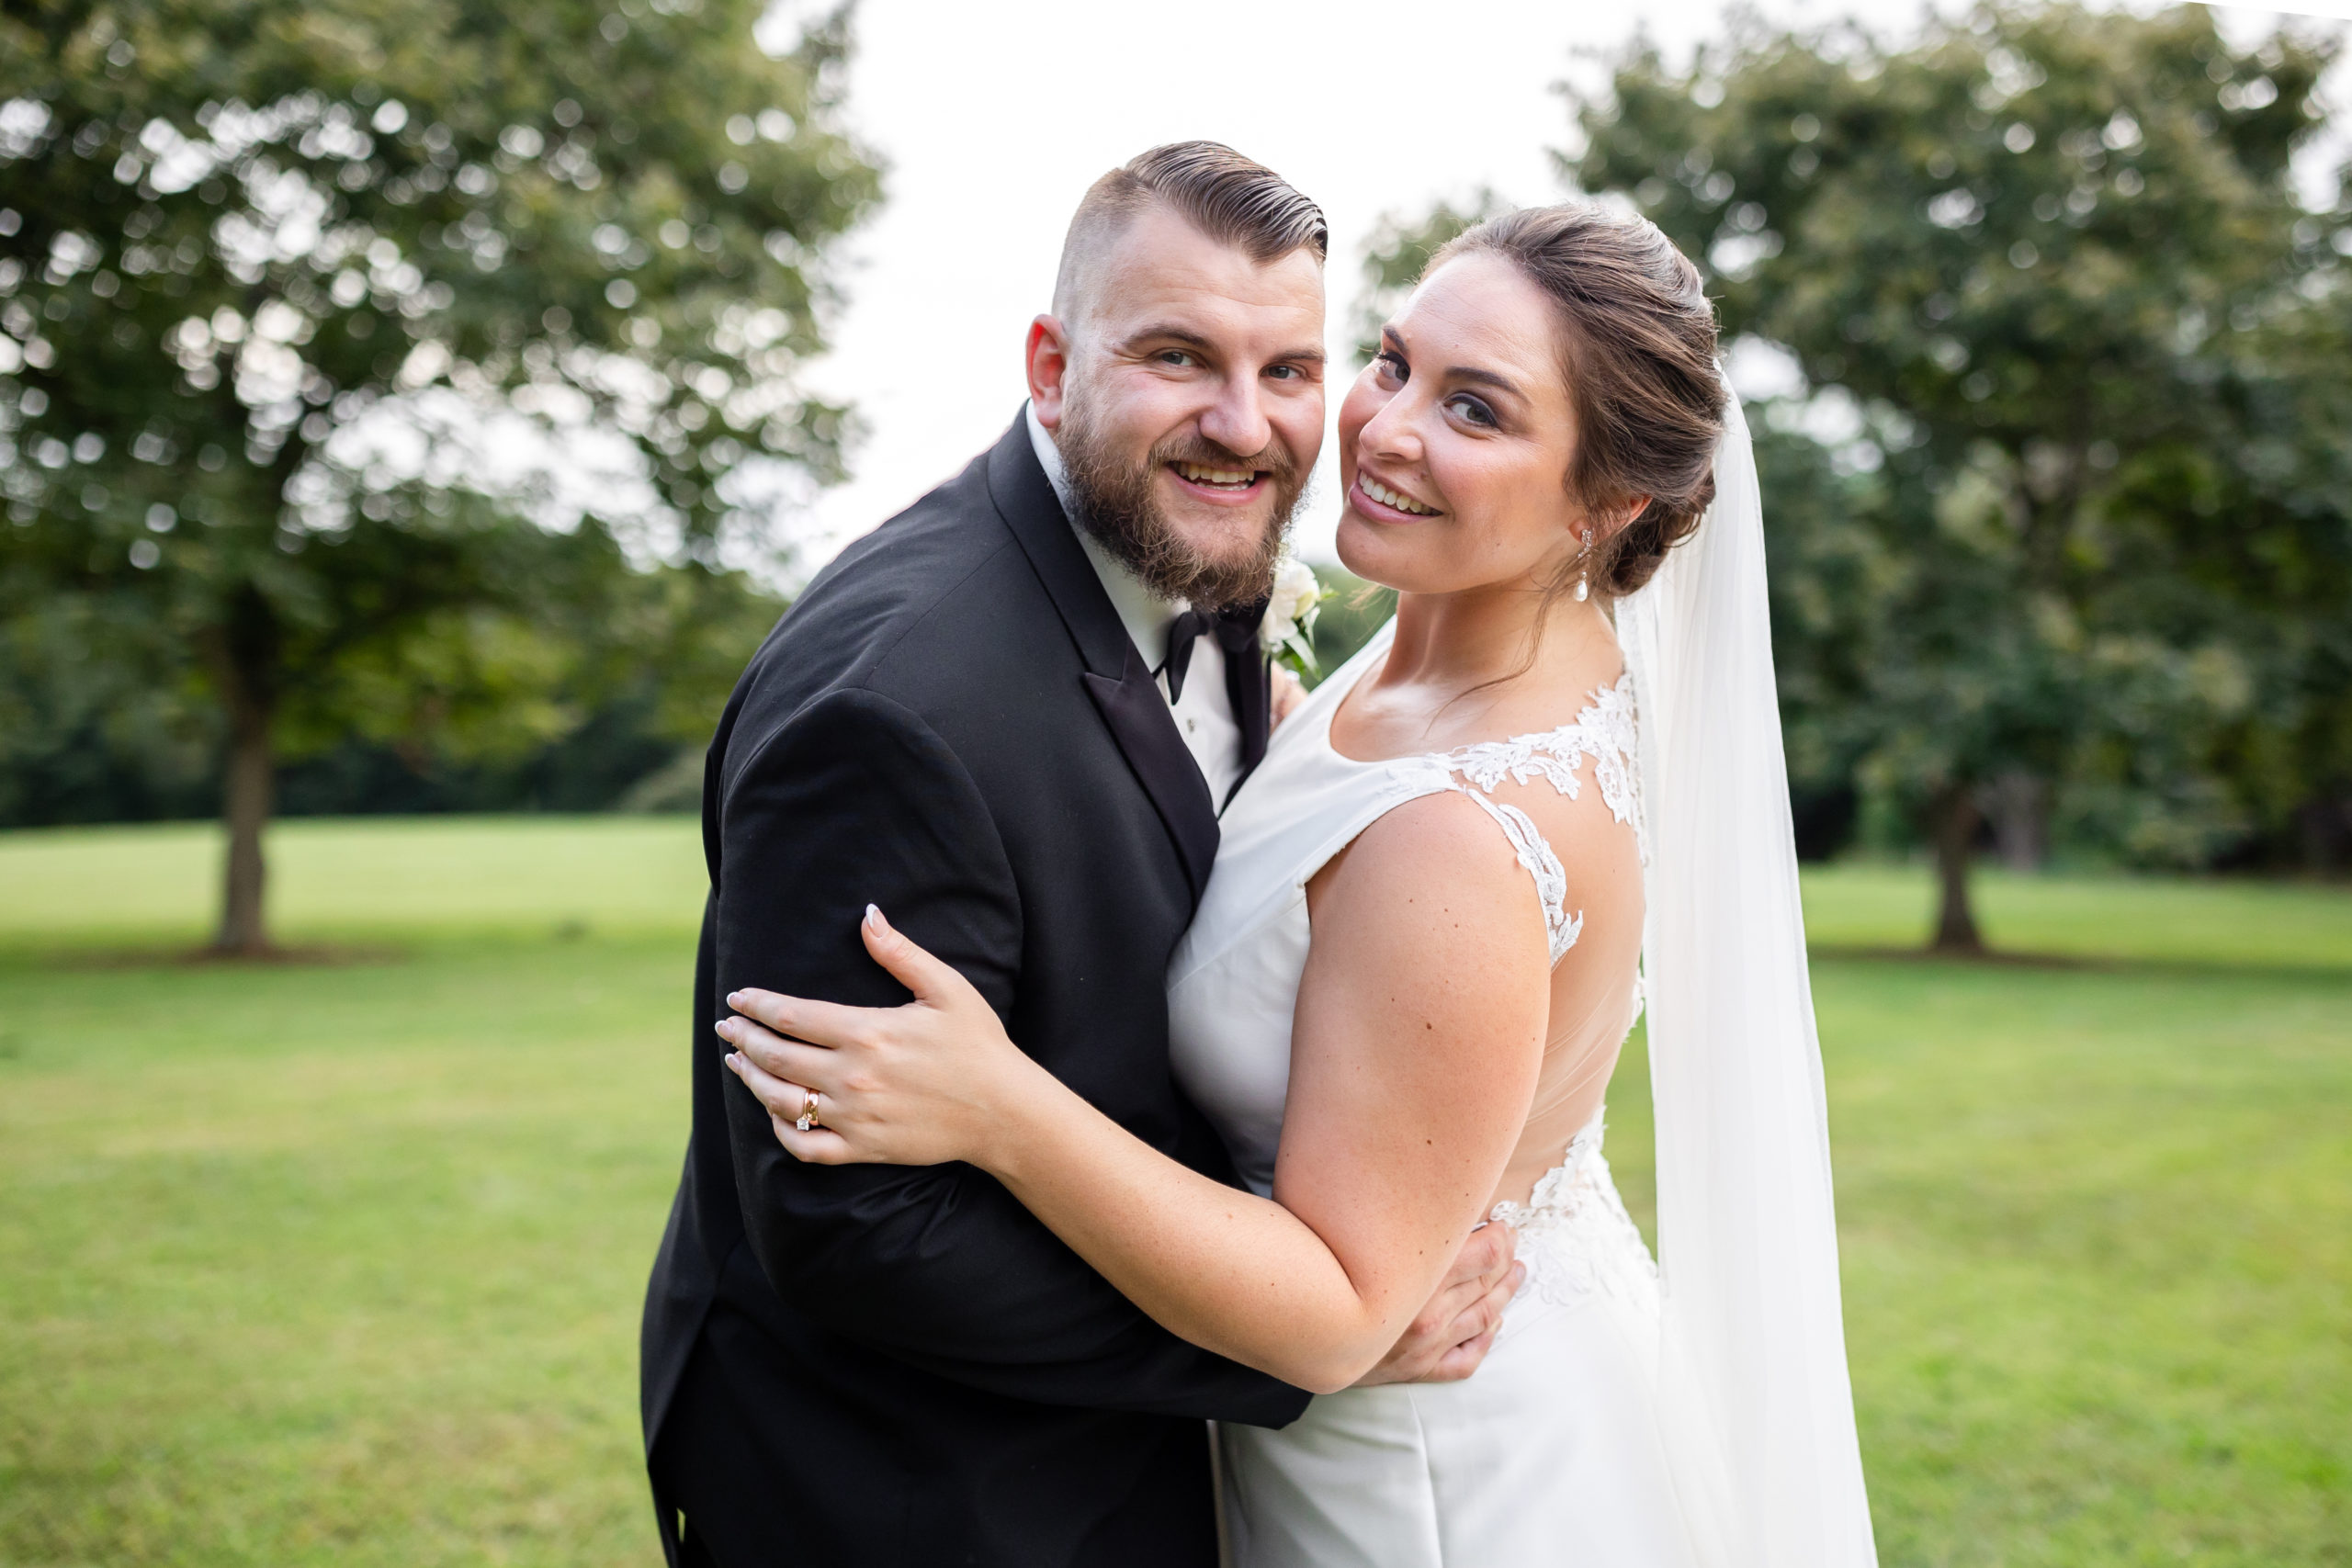 Bride and Groom Portrait - Luxury Wedding Photographs from Rockfield Manor in Bel Air, MD - Luxury Wedding Photographer - Wedding Photographer DMV